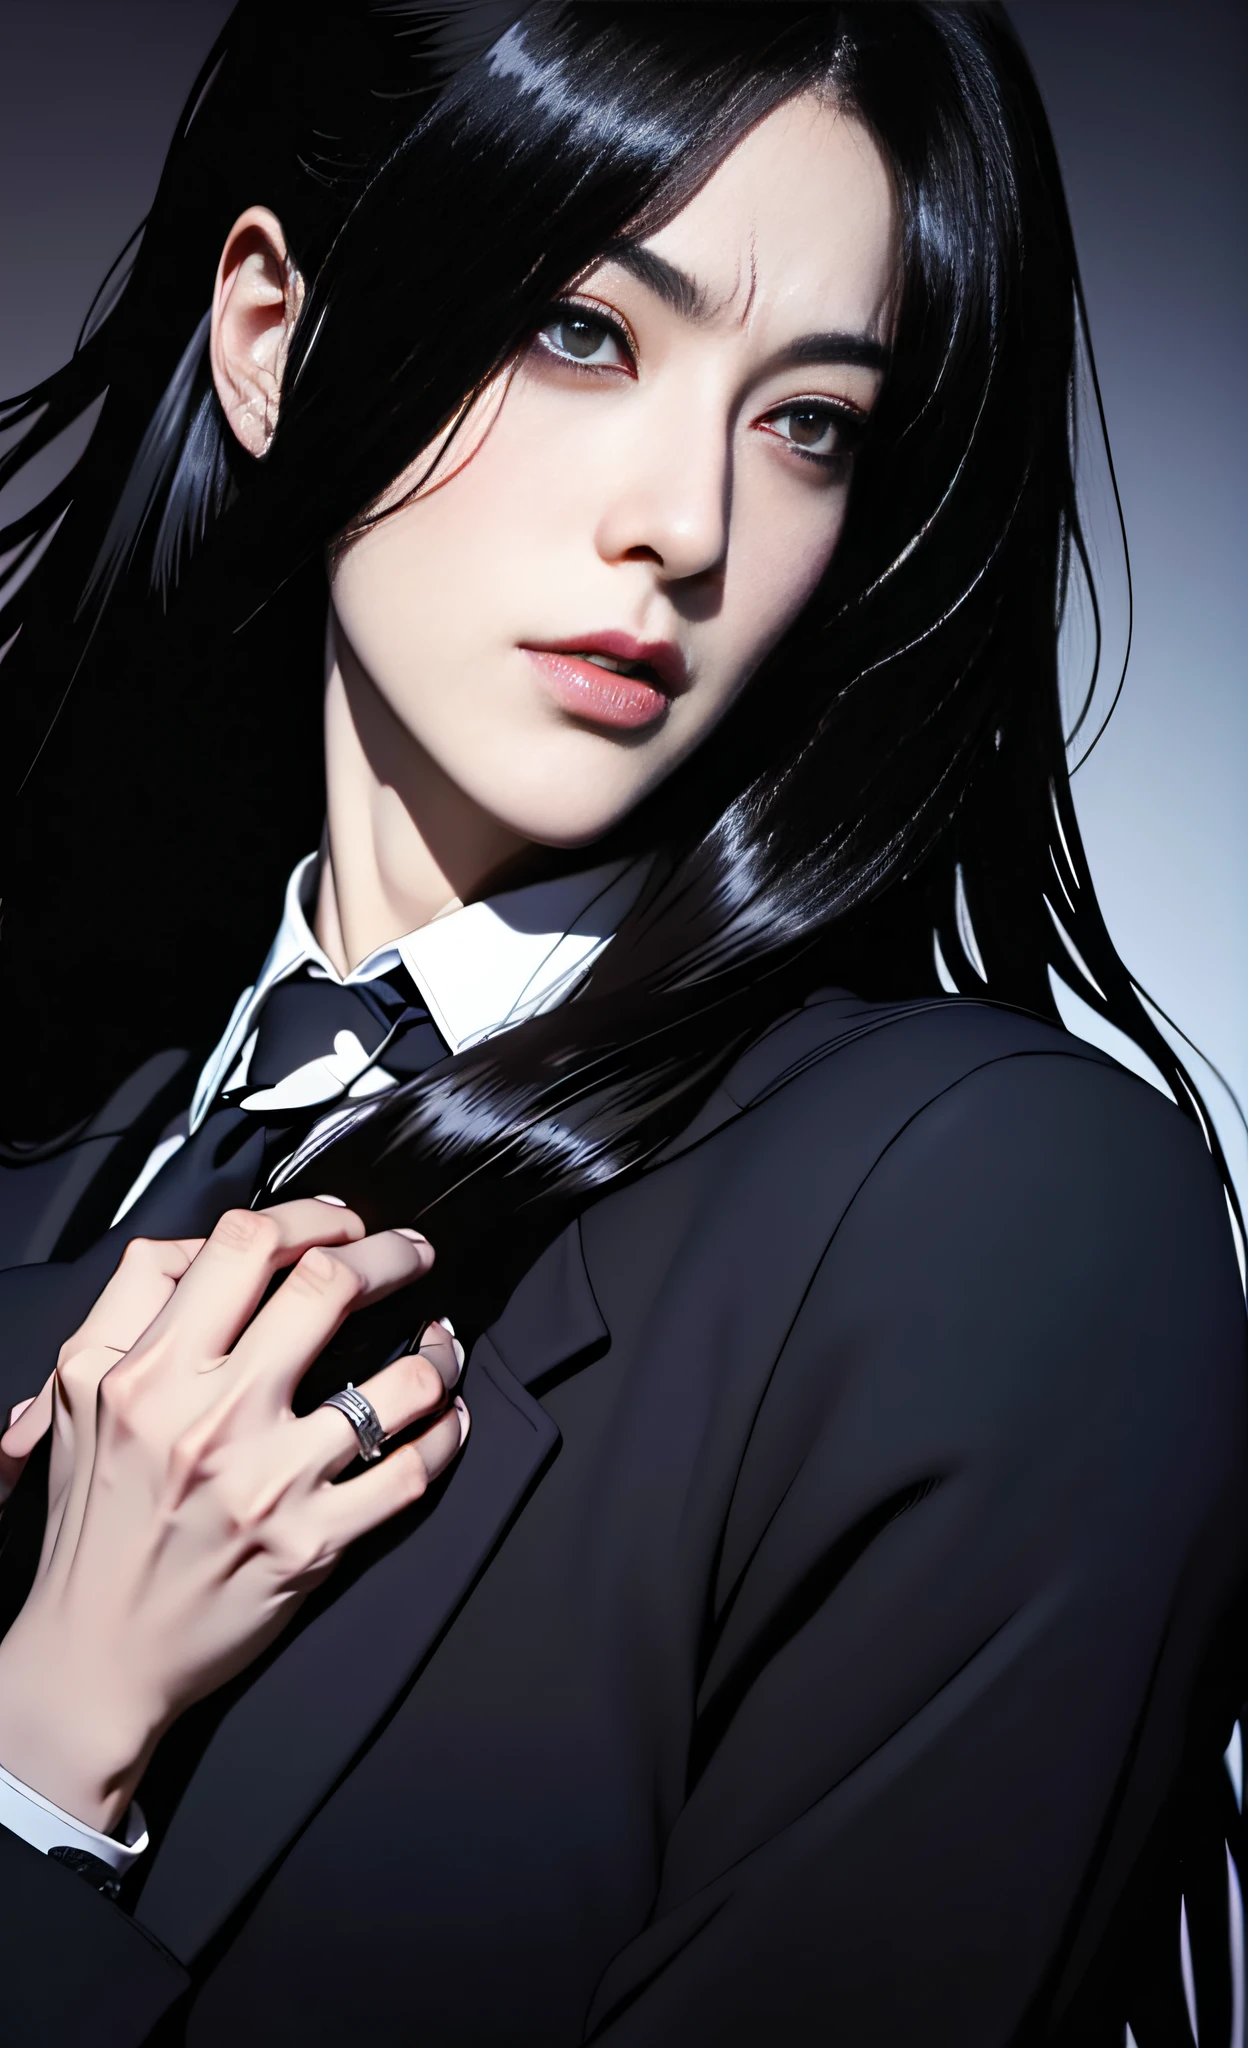 Close-up of a man in a suit and tie, androgynous vampire, junji ito 4 k, with long dark hair, ito junji art, style of junji ito, Dark Costume, portrait of sadako of the ring, beautiful androgynous prince, delicate androgynous prince, with his long black hair, girl in suit, beautiful breasts, perfect anatomy, Gloomy color scheme,